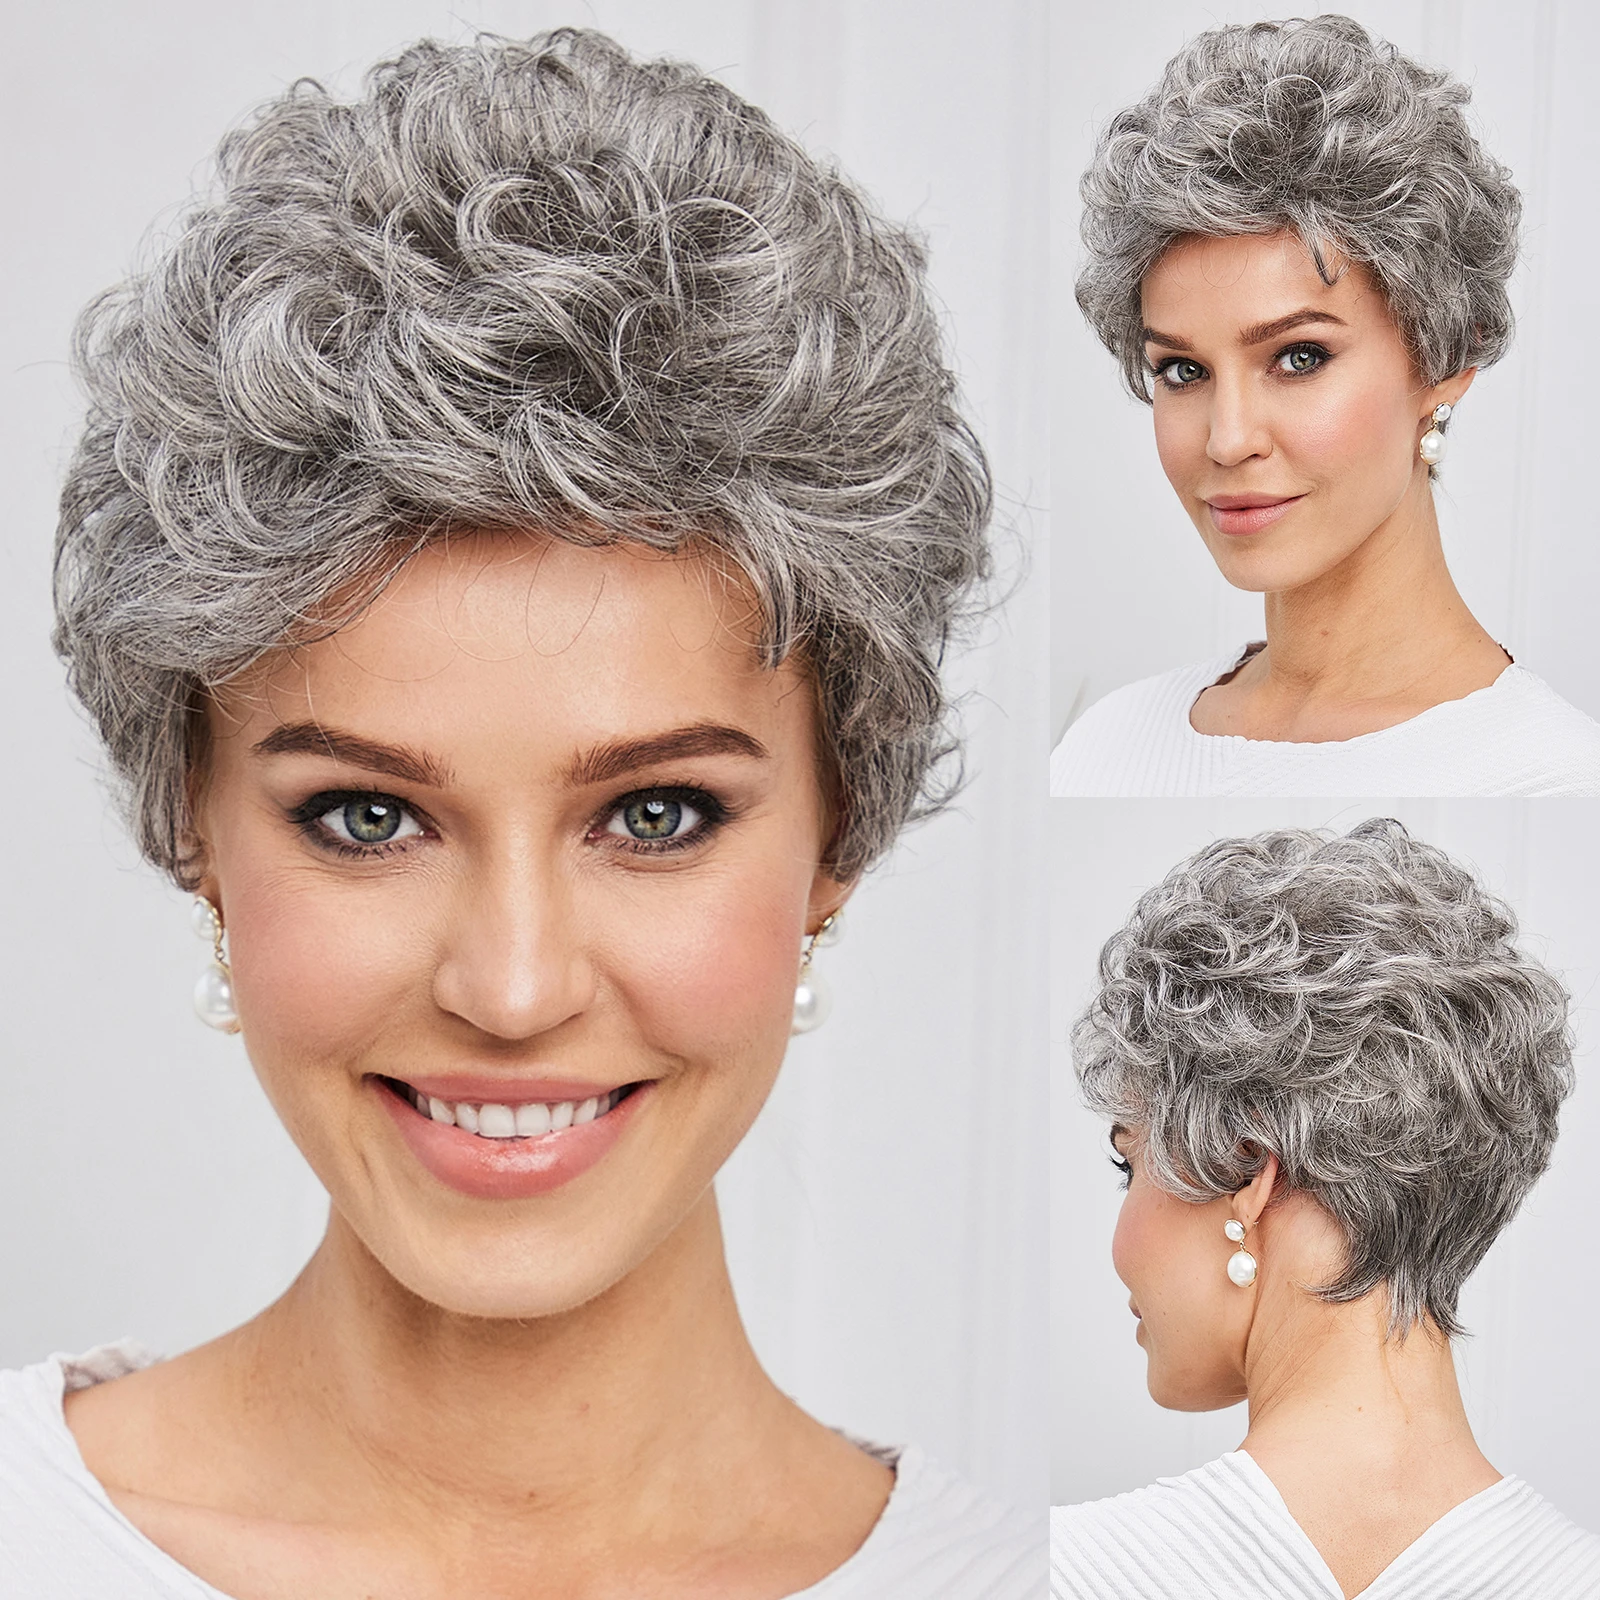 

Human-hair Like Texture Gray Wigs for Women Momy Short Silver Gray Wavy Curly Wigs for Women Grey Layered Pixie Cut with Bangs